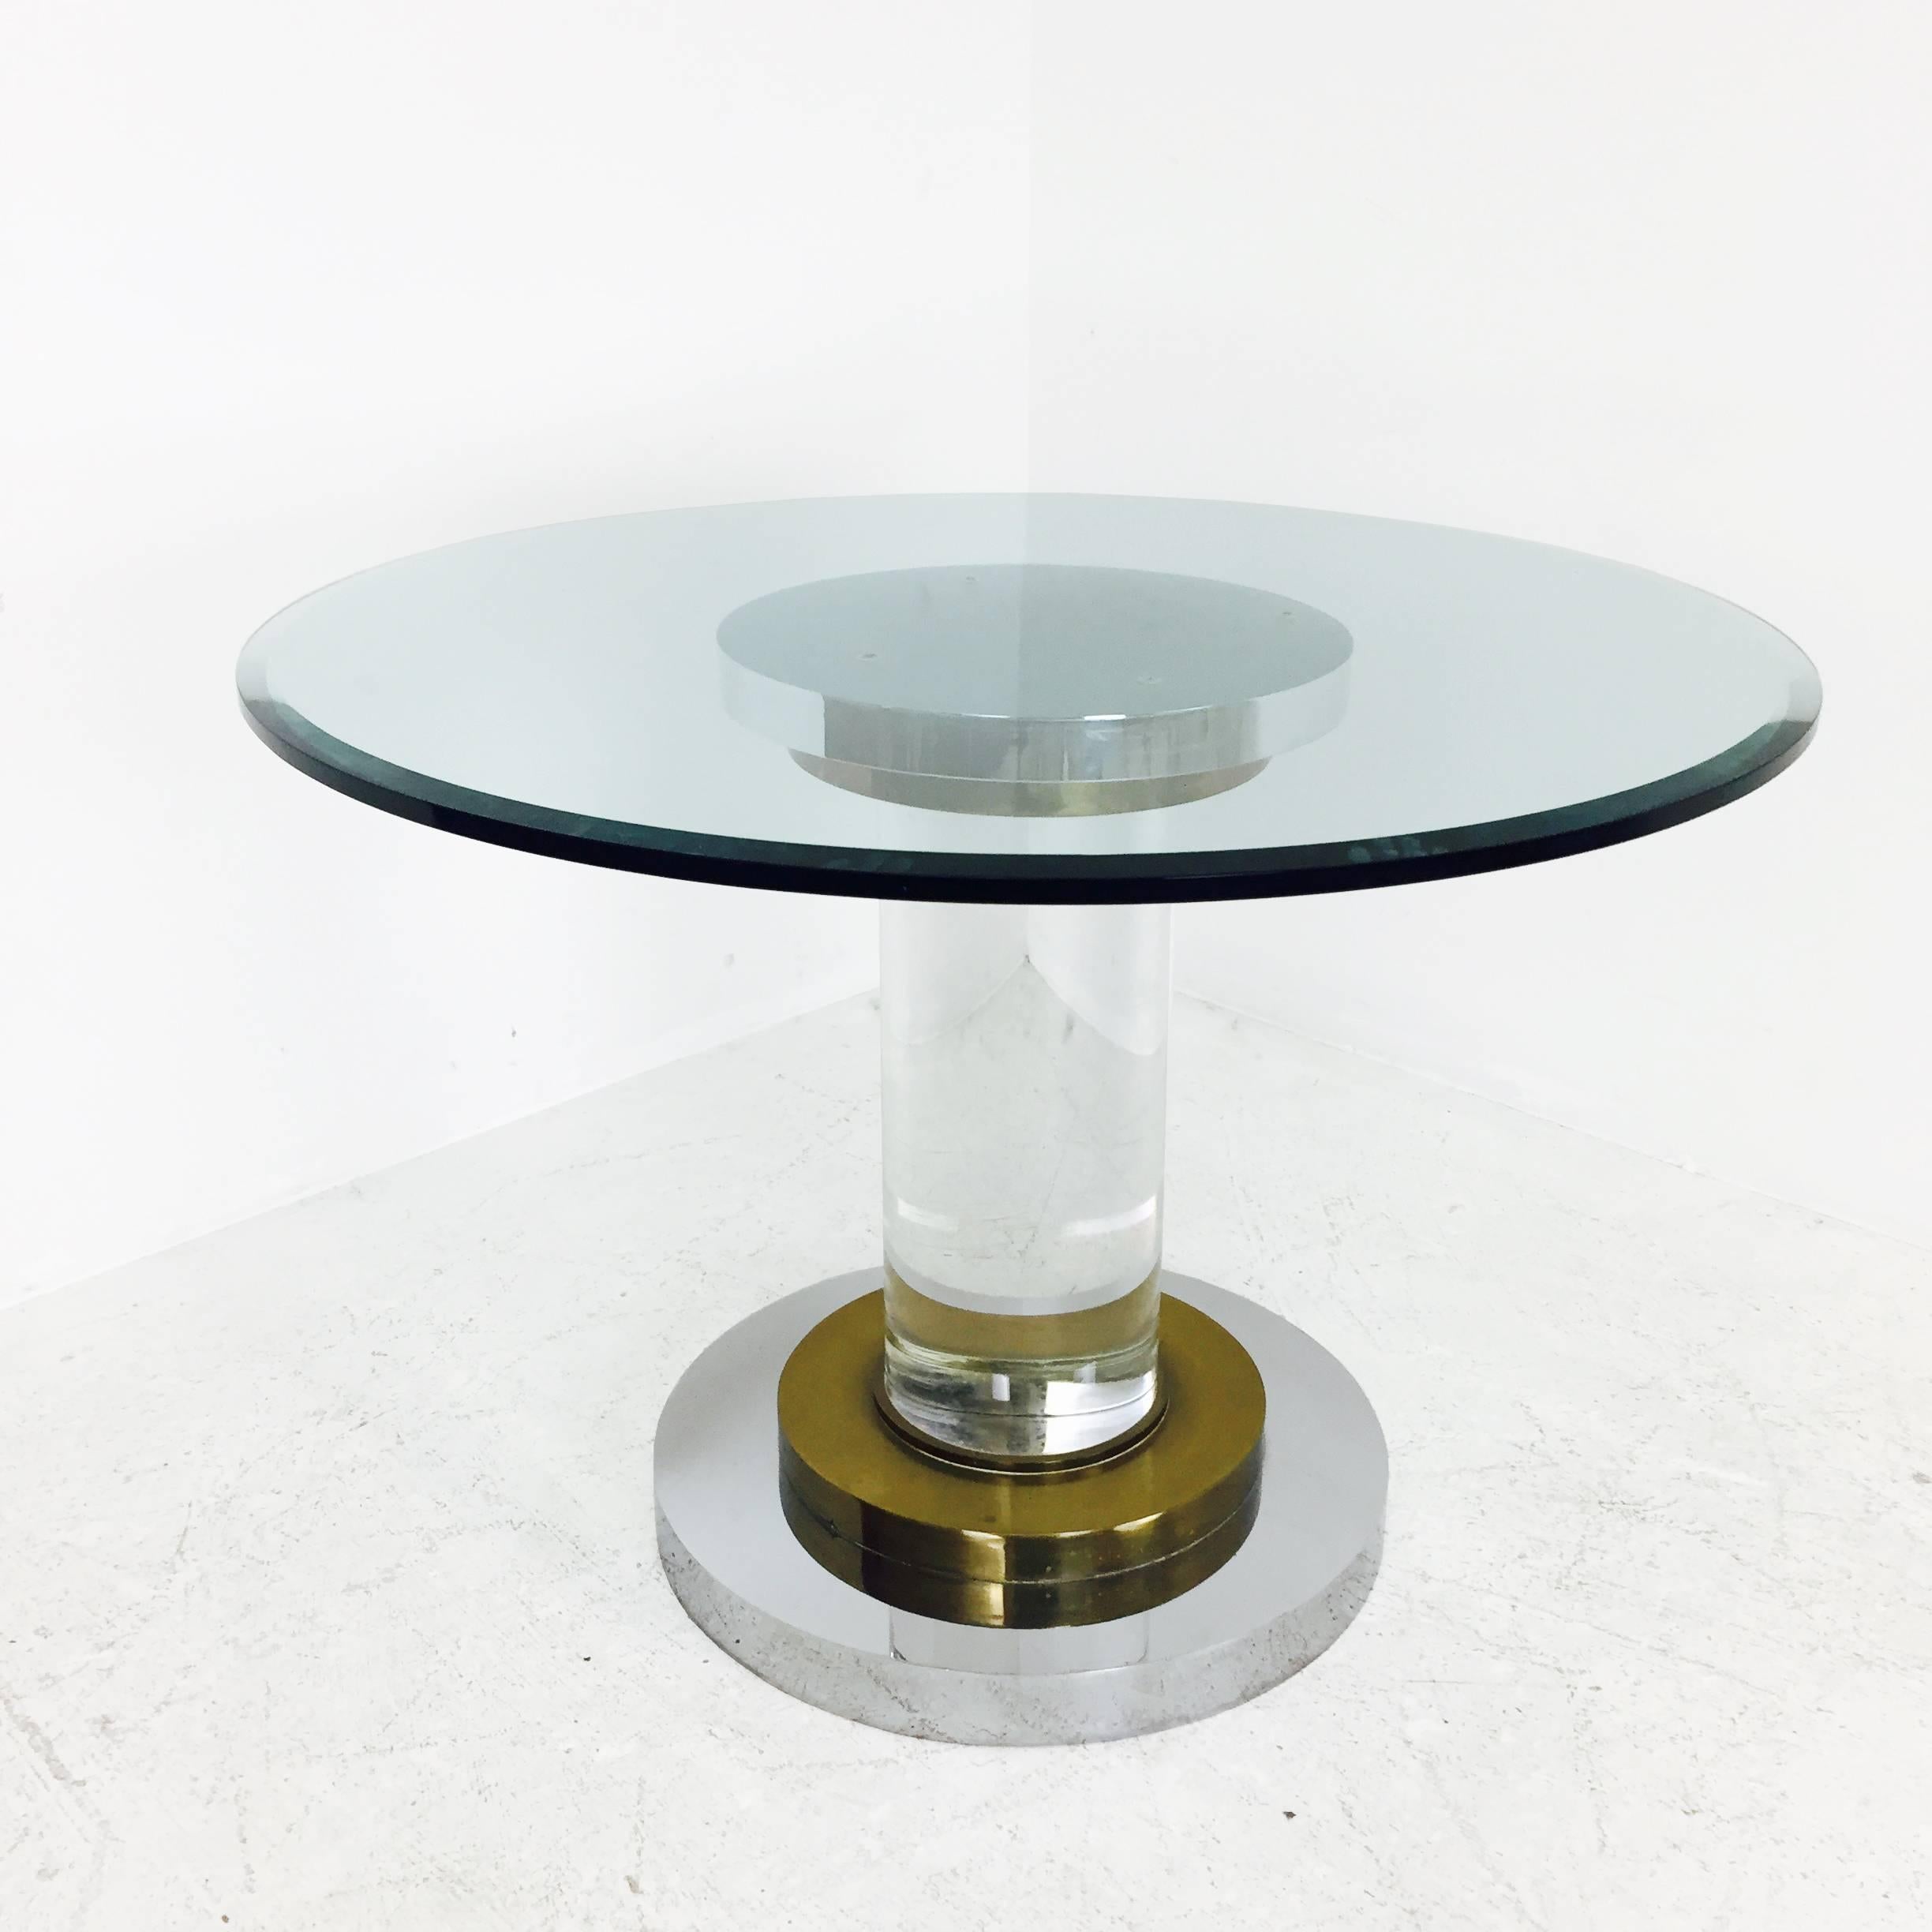 Lucite pedestal dining table with polished stainless and brass accents. Glass top does have surface scratches, circa 1970s

Table only

dimensions: 48" diameter  x 29" tall
3/4" glass
24"diameter pedestal base.